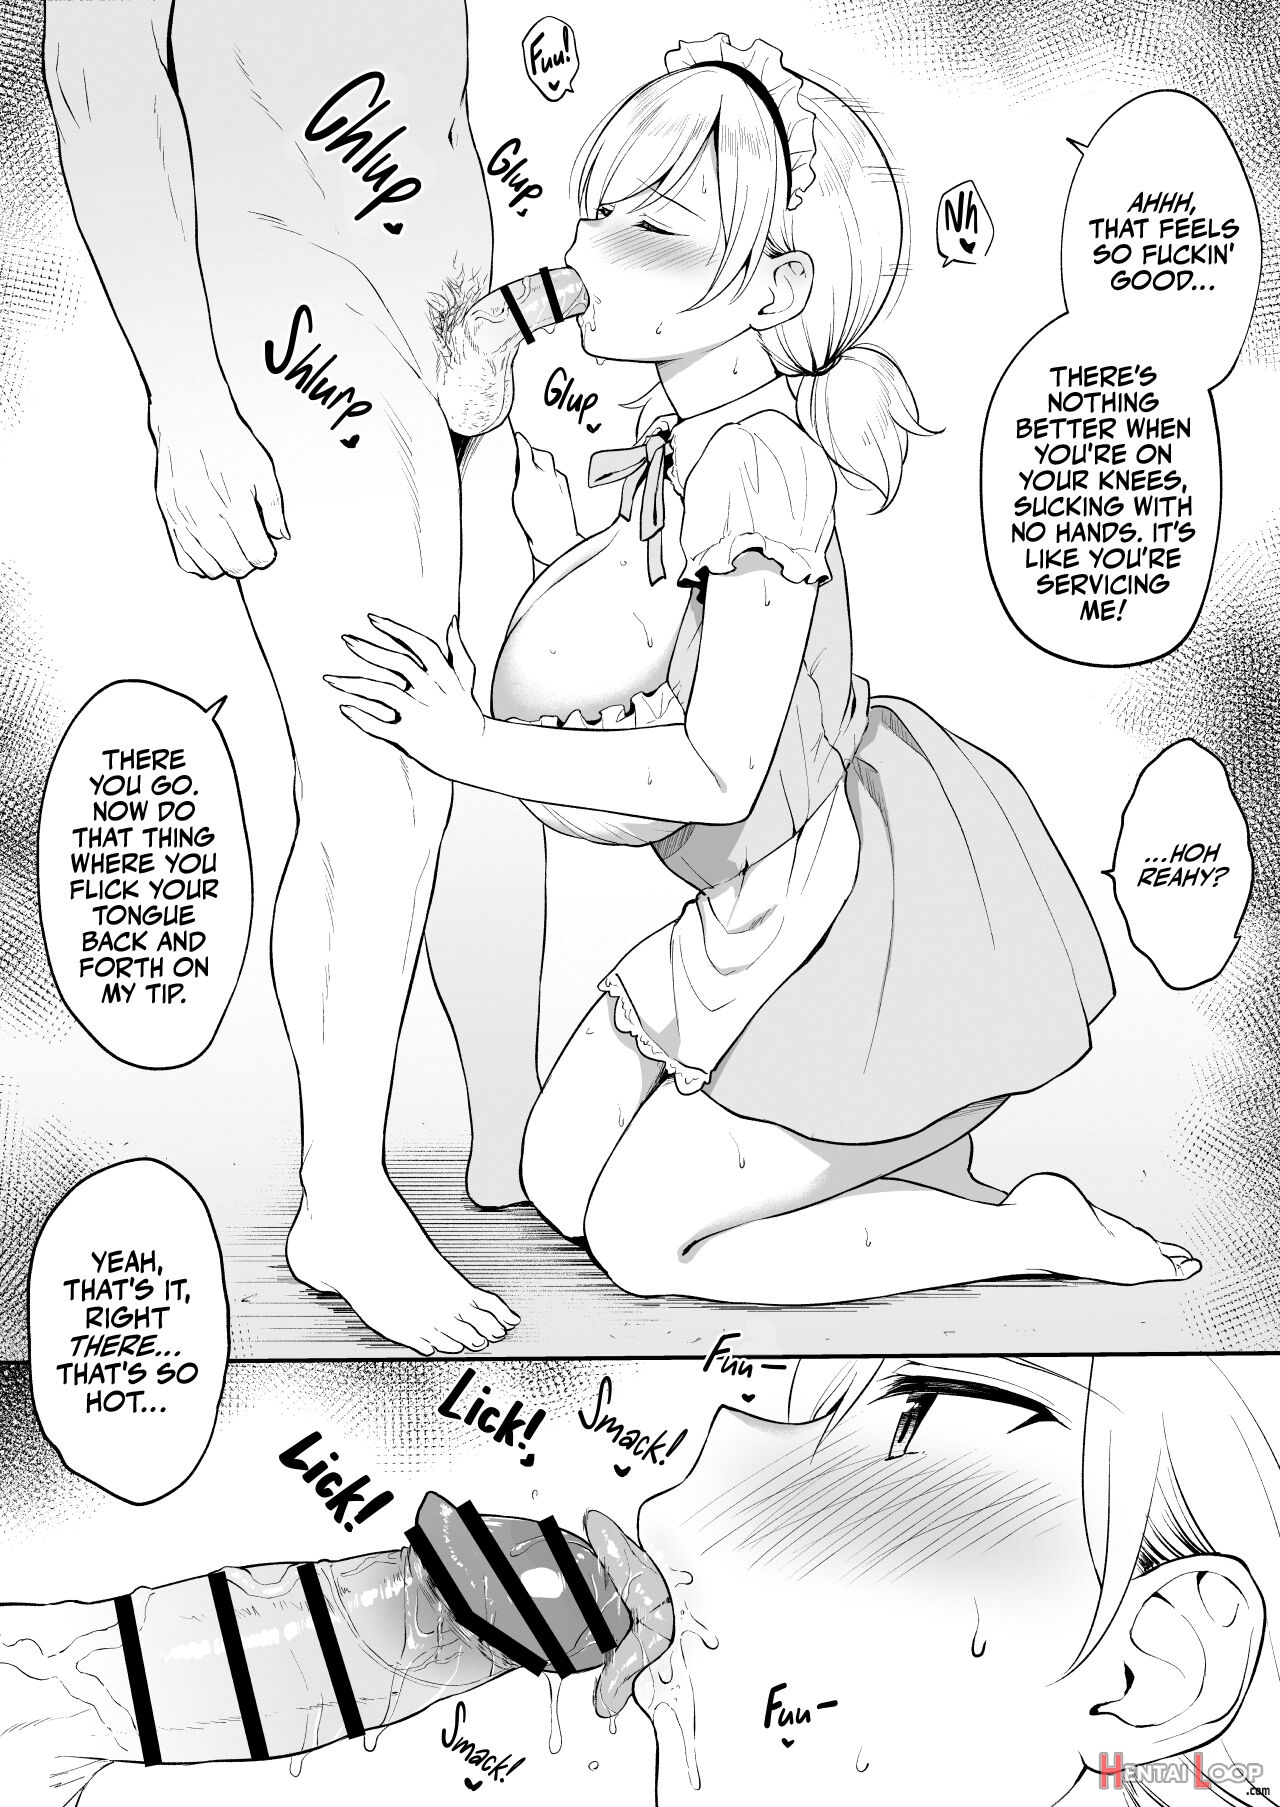 Cosplay Sex With My Best Friend's Little Sister Who's Wearing A Maid Outfit From Donki page 4